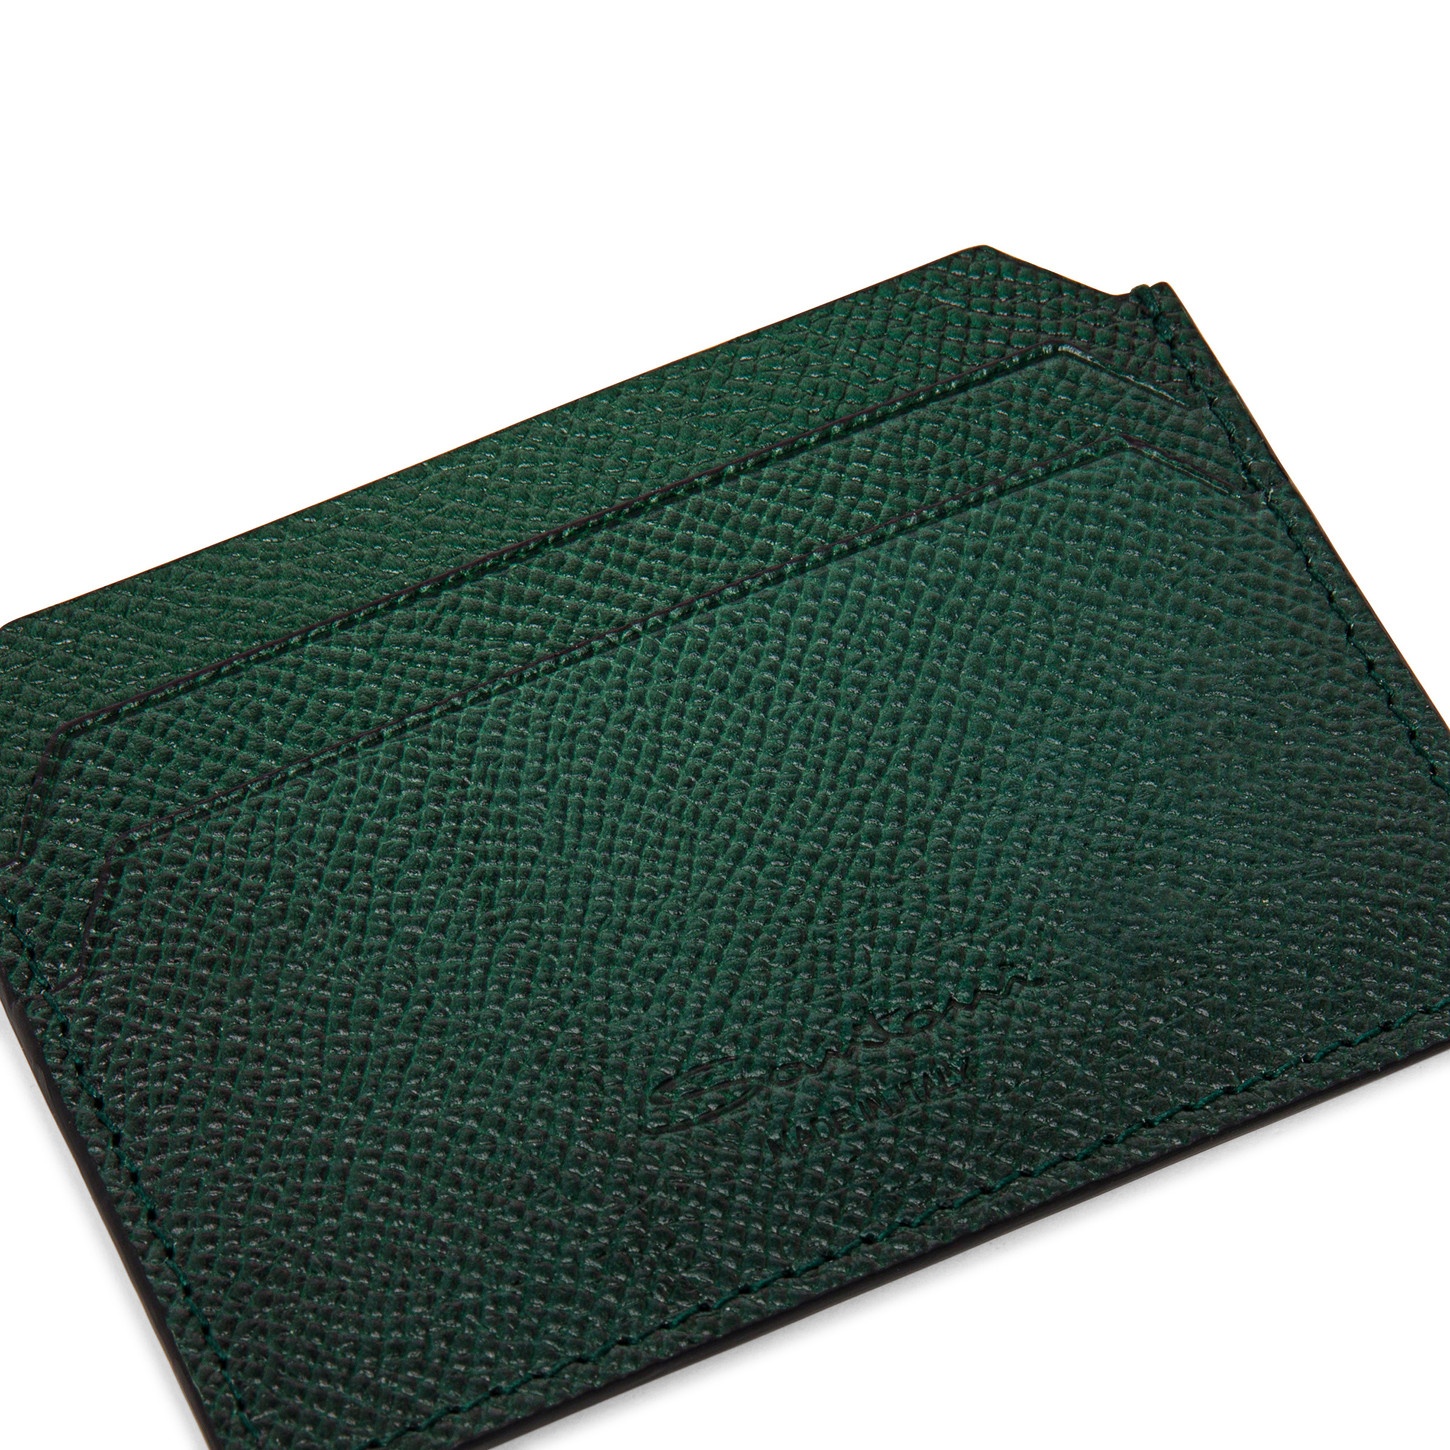 Green saffiano leather credit card holder - 5